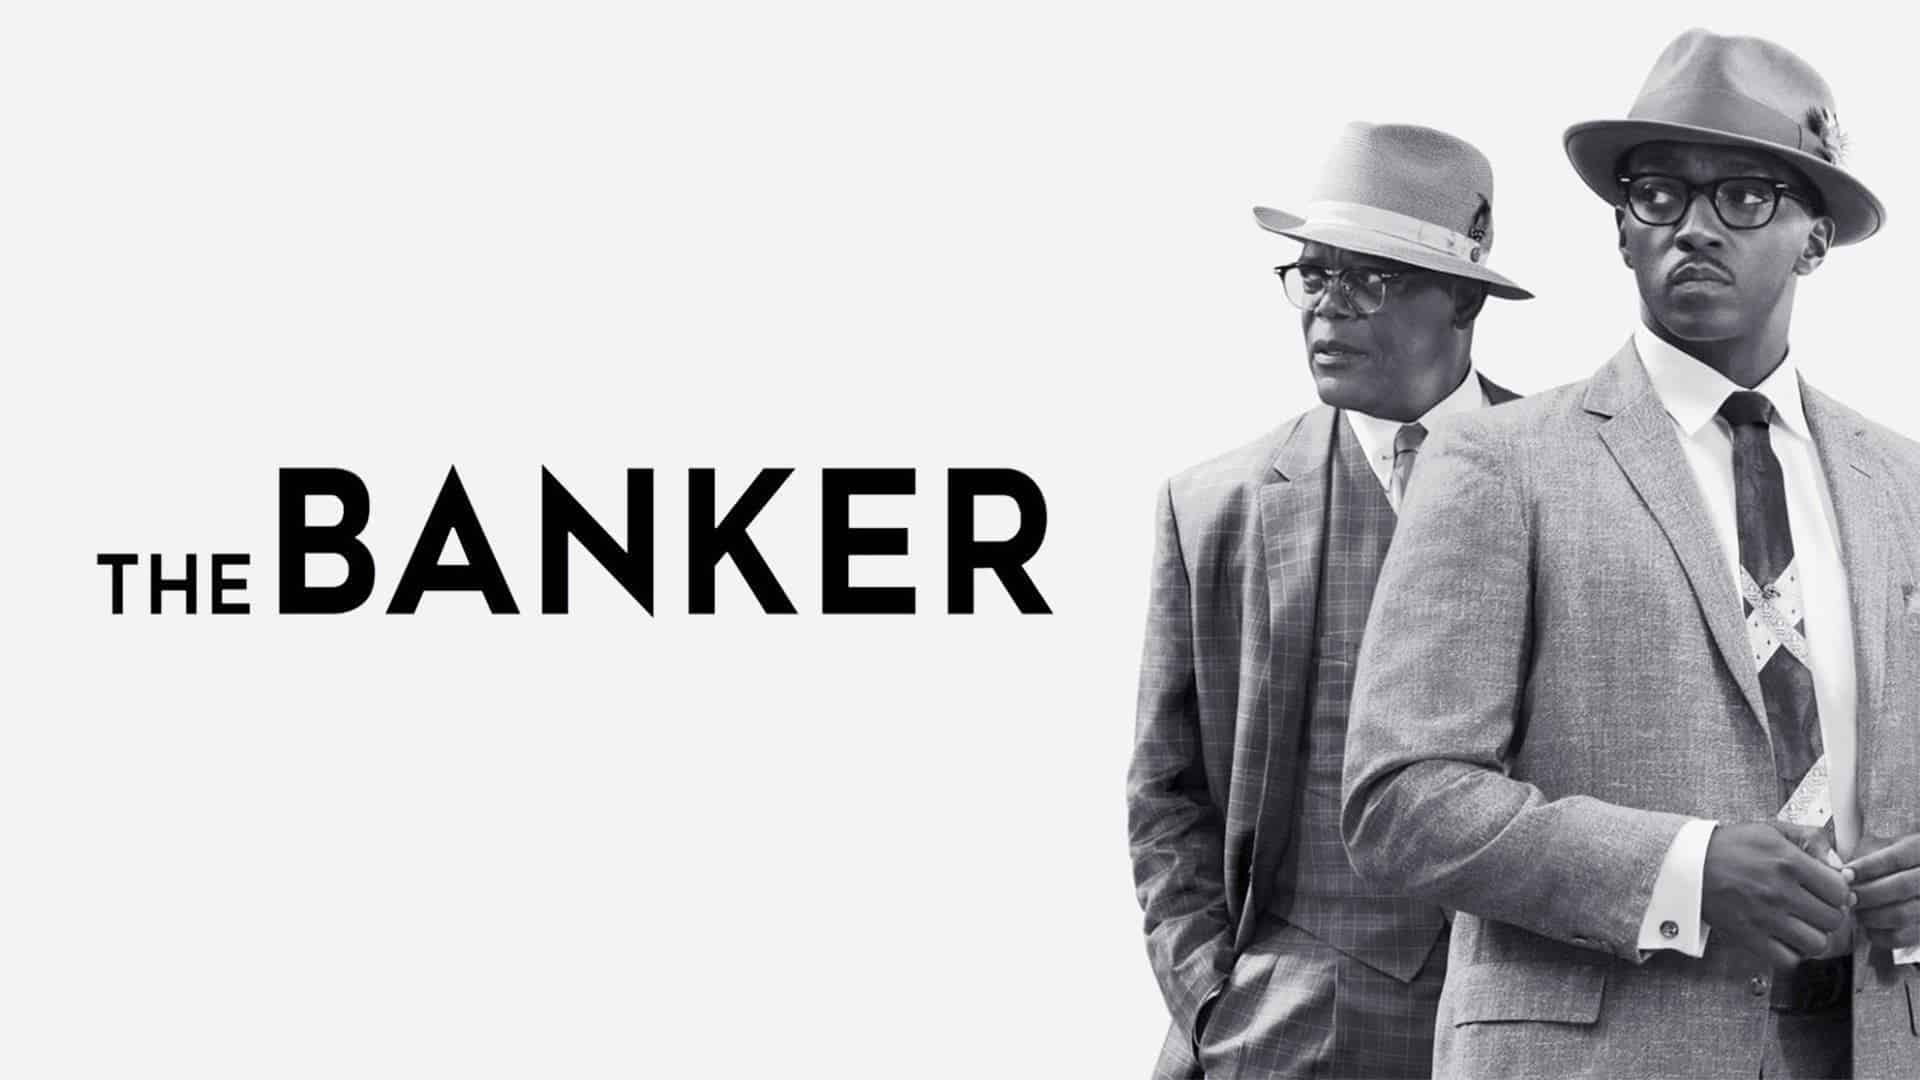 The Banker (2020) Movie Google Drive Download